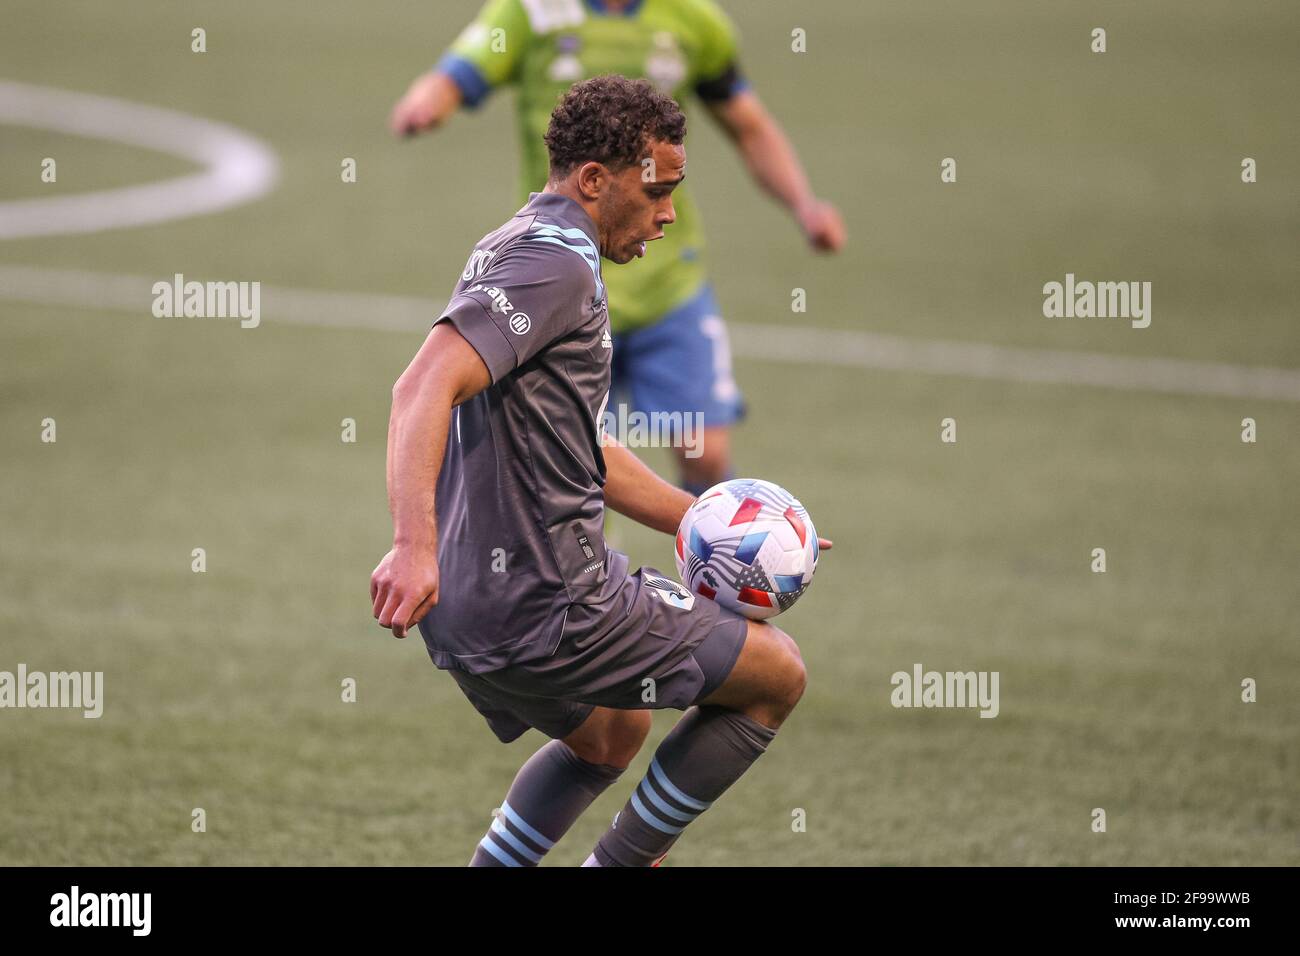 Minnesota United FC midfielder Hassani Dotson (31) takes the ball during the first half of an MLS match against the Seattle Sounders FC at Lumen Field Stock Photo